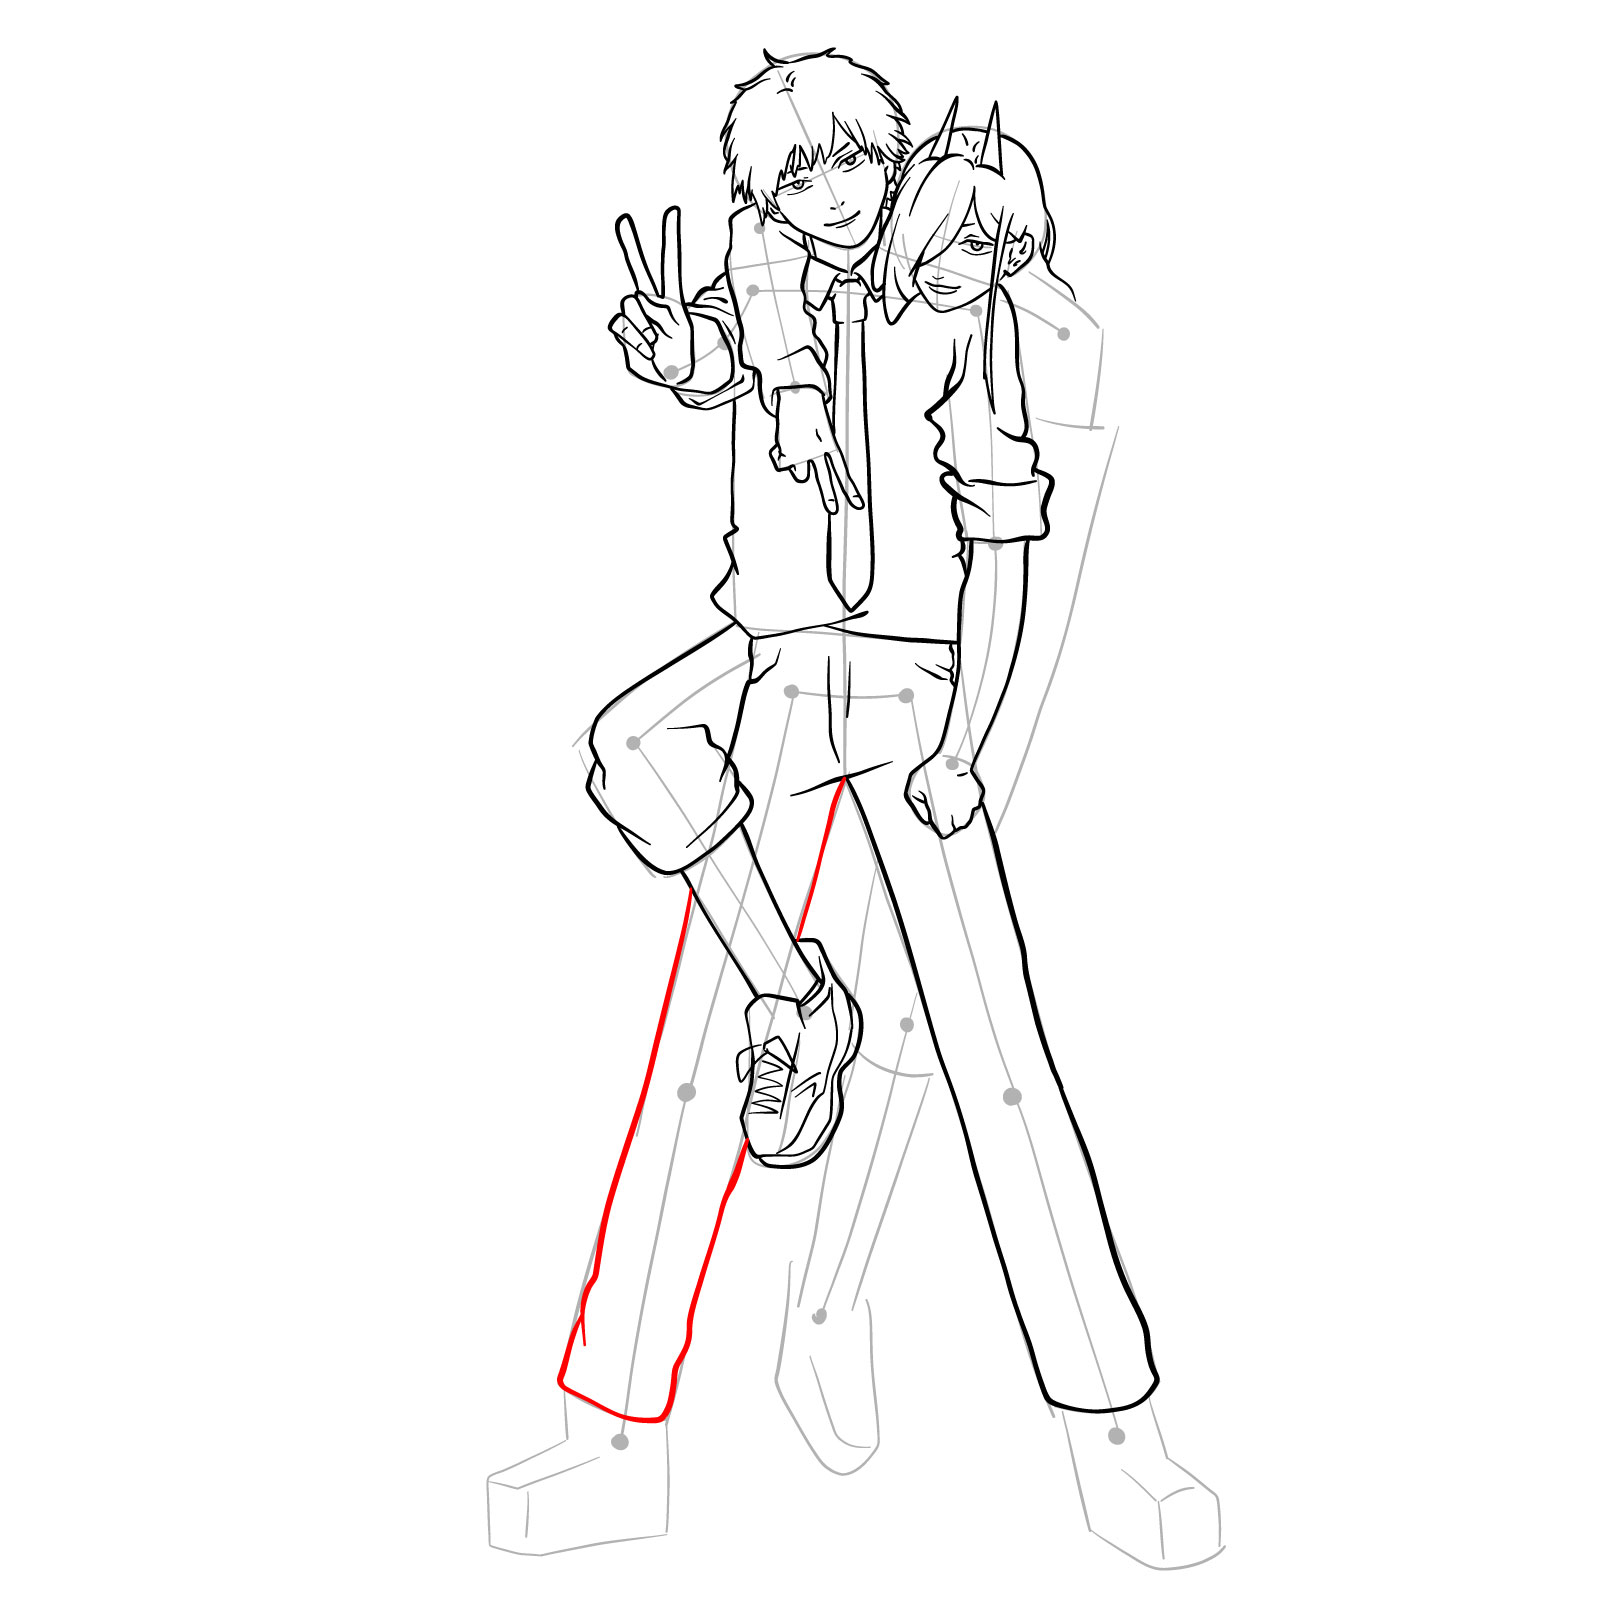 How to draw Denji and Power together - step 33